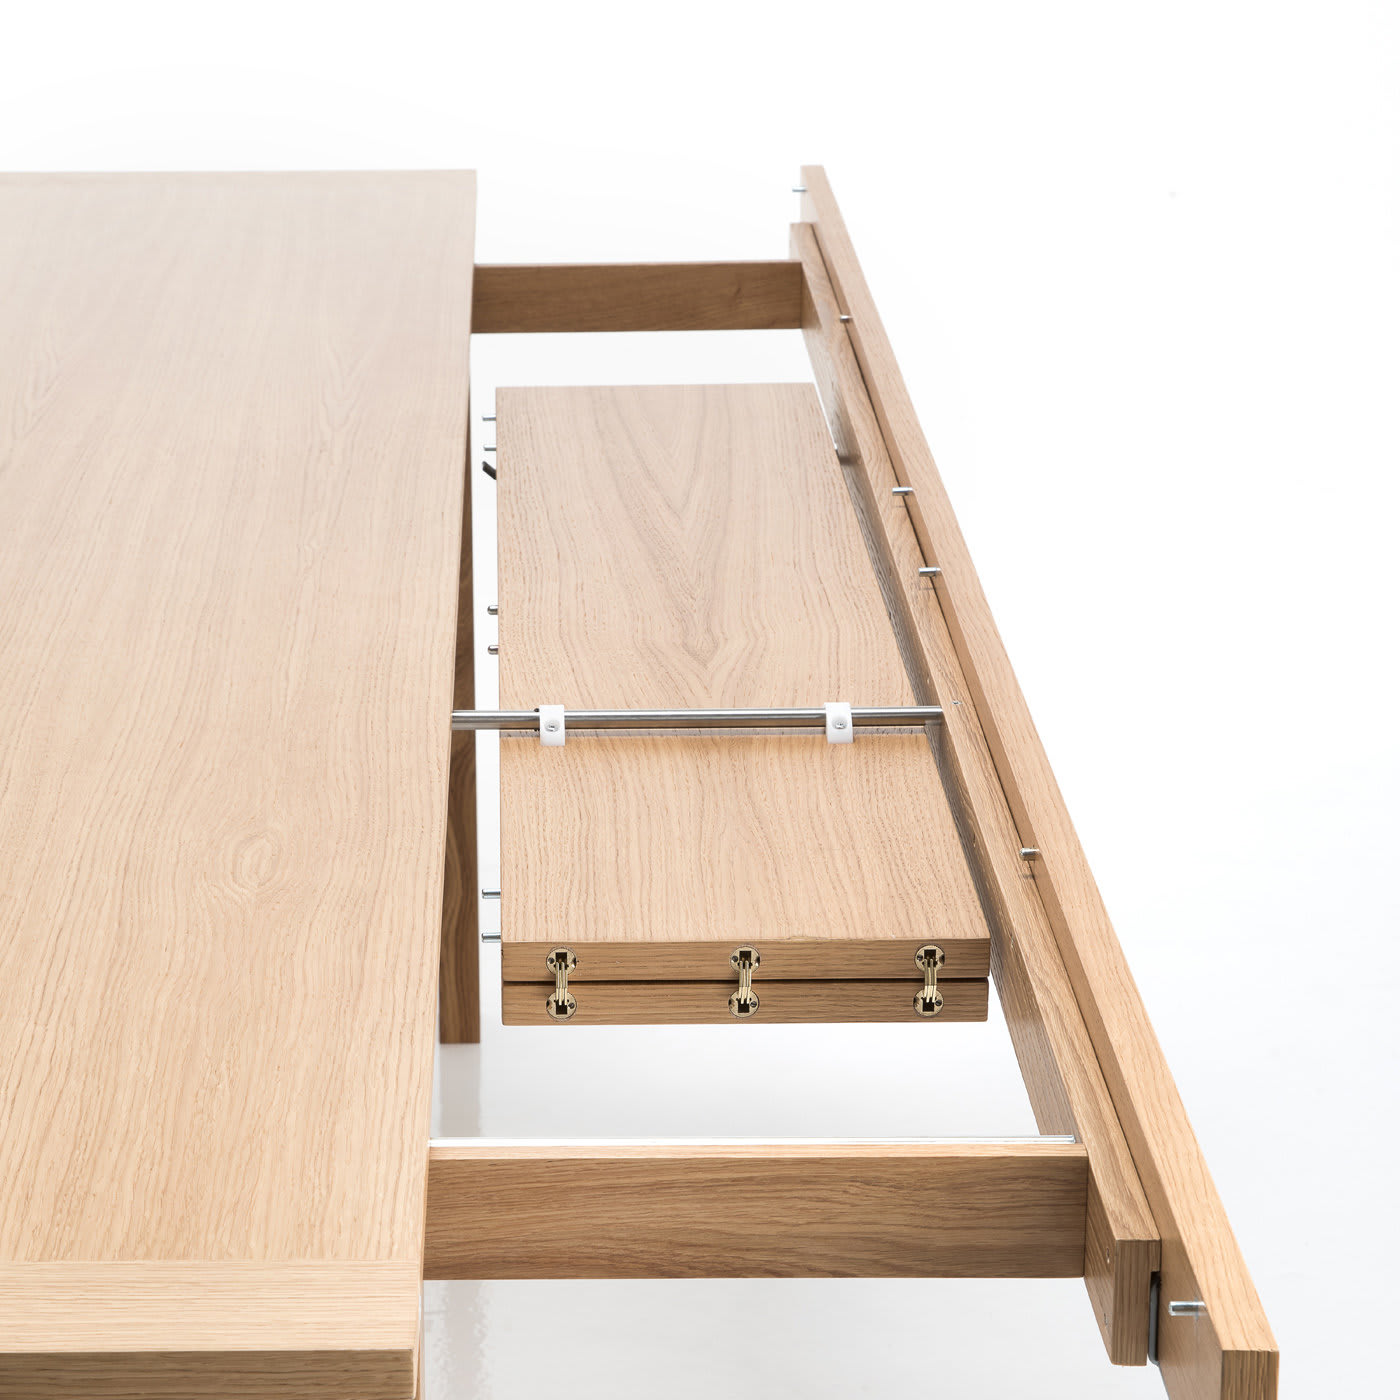 Capriata Extendable Dining Table by Carlo Cumini - Horm